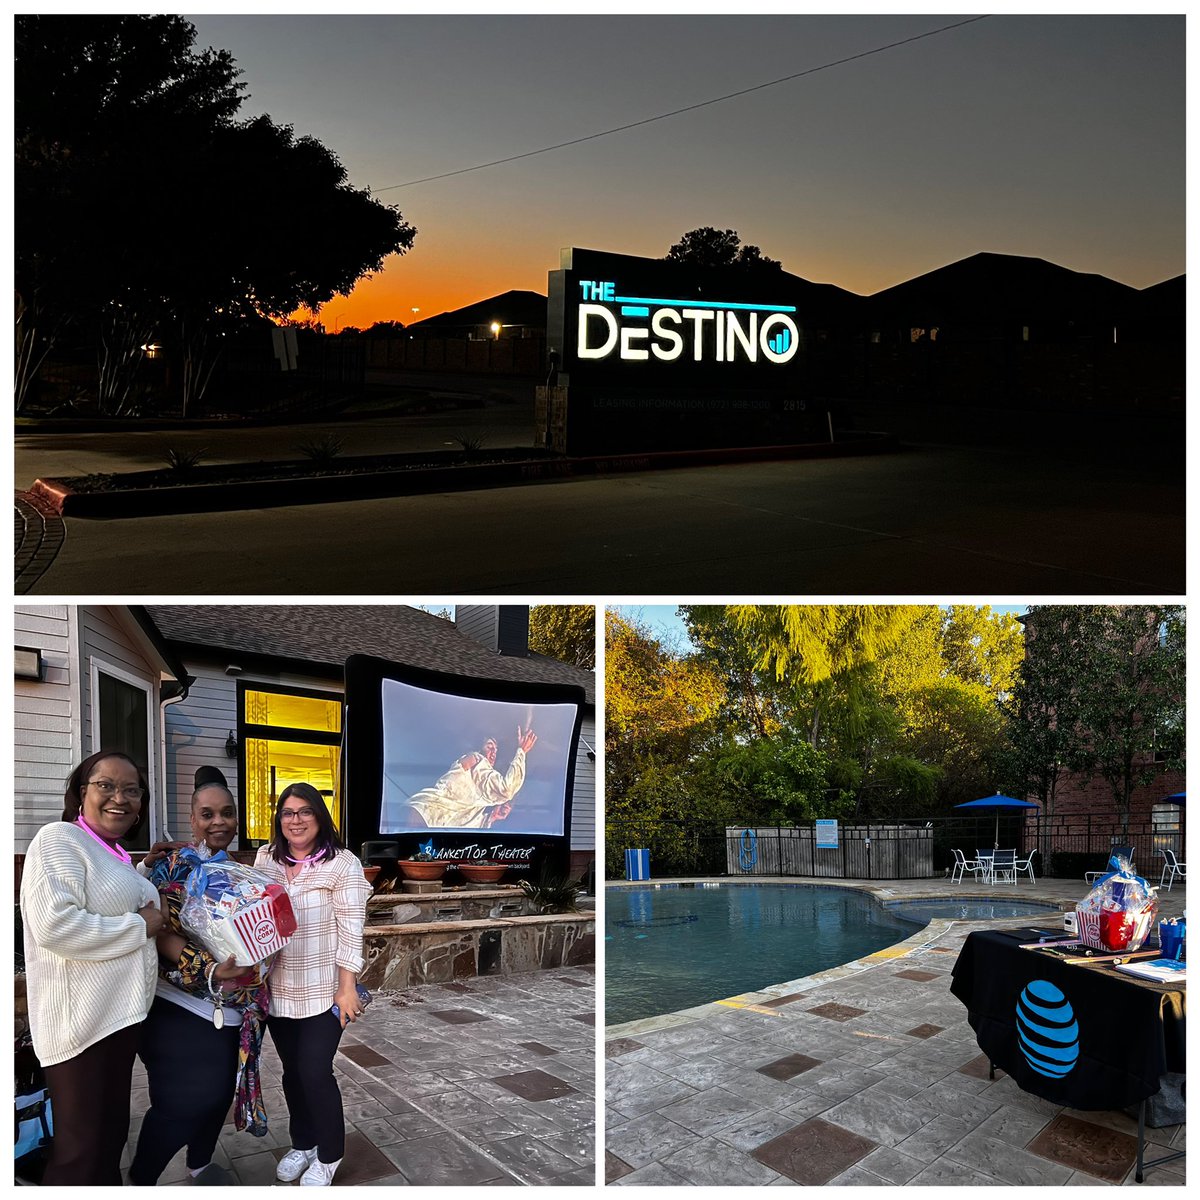 AT&T is out at The Destino Apartment community helping everyone with all of their Fiber needs!!! #Fiber #ATT @NTX_Market @Stuff_stephsaid @eddy_luster @fifthnorth @dbustamante1210